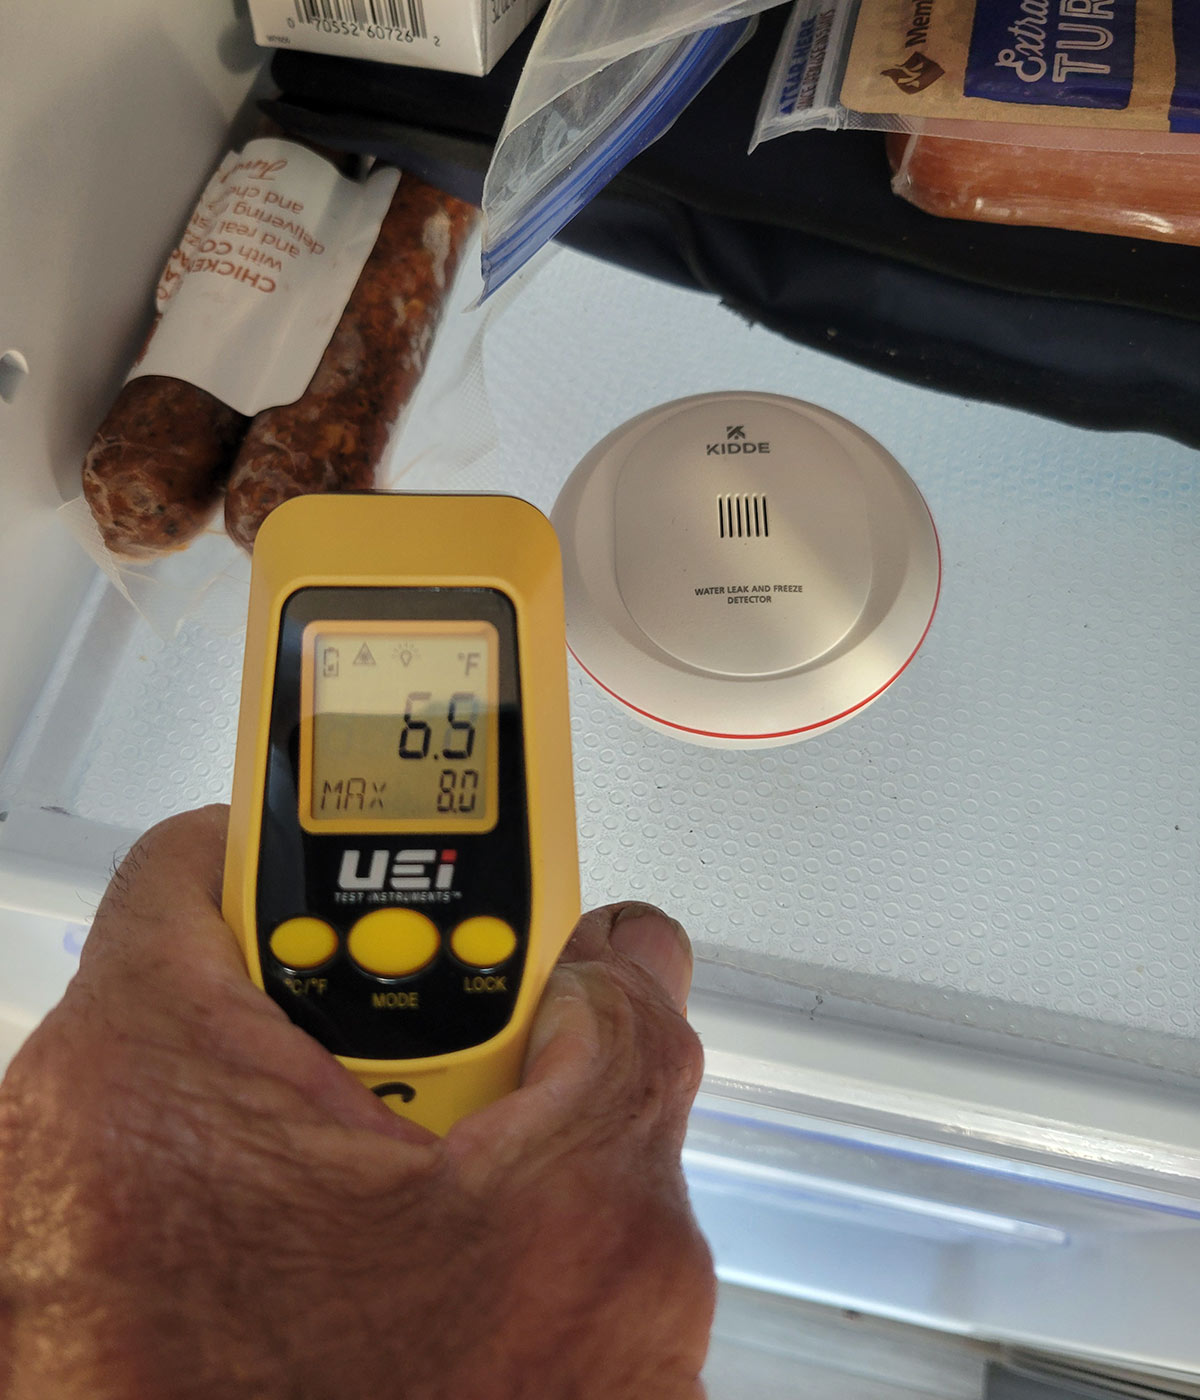 the Kidde disc sits on a shelf in a refrigerator, a hand holds a temperature gun to measure the temperature of the refrigerator